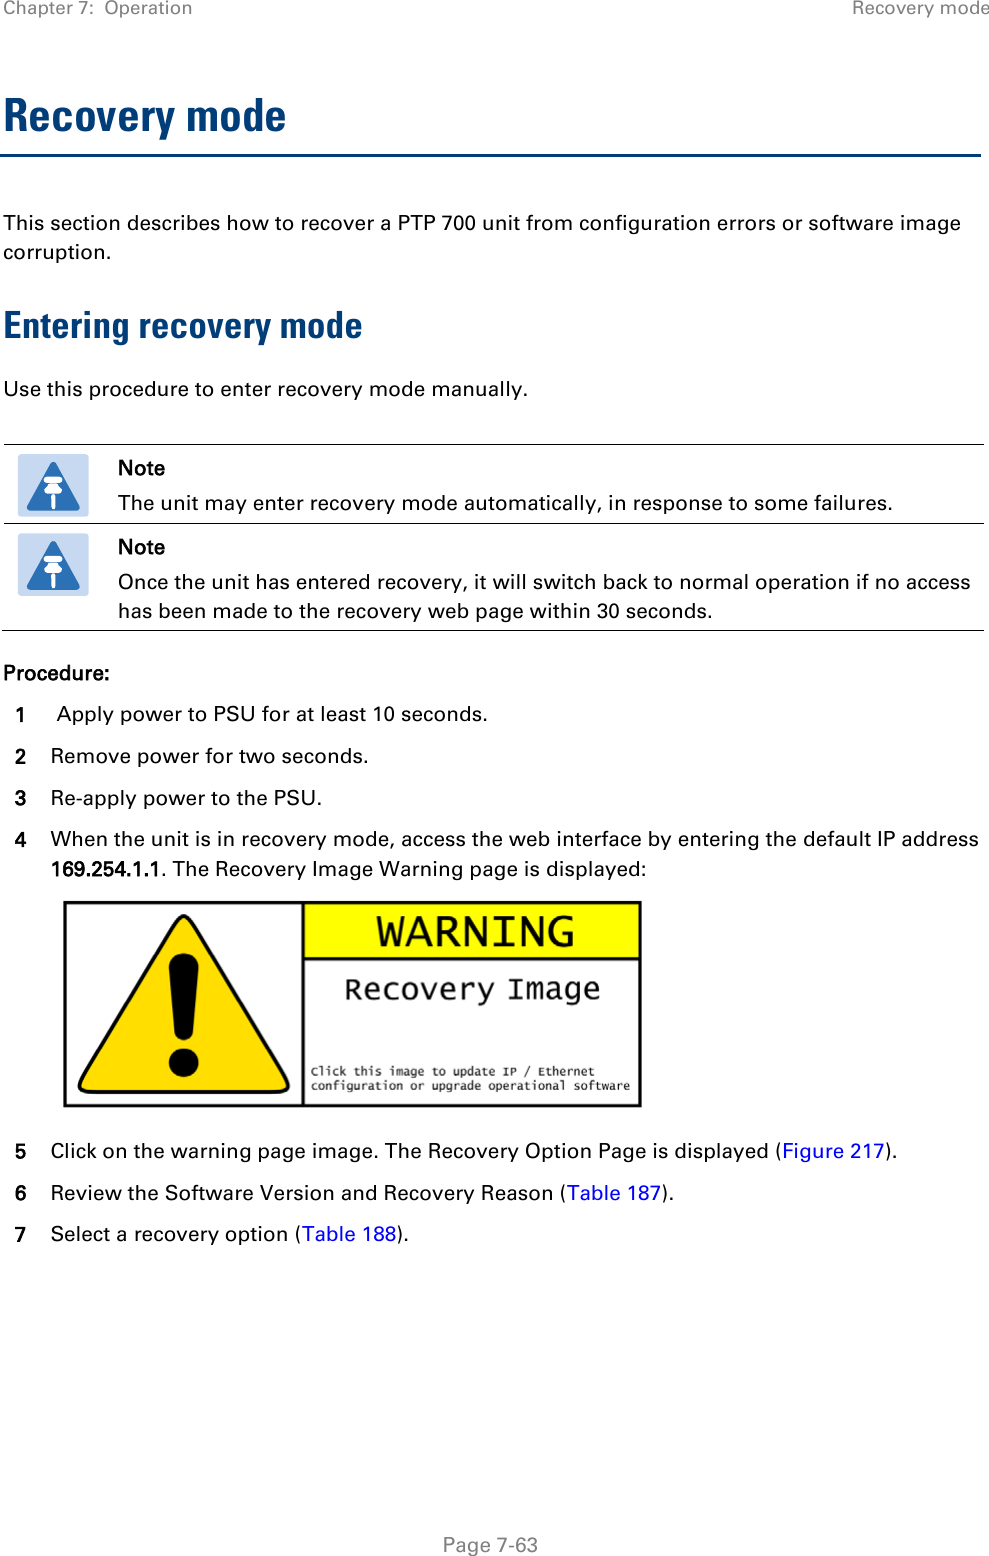 Chapter 7:  Operation Recovery mode  Recovery mode This section describes how to recover a PTP 700 unit from configuration errors or software image corruption. Entering recovery mode Use this procedure to enter recovery mode manually.   Note The unit may enter recovery mode automatically, in response to some failures.  Note Once the unit has entered recovery, it will switch back to normal operation if no access has been made to the recovery web page within 30 seconds. Procedure: 1  Apply power to PSU for at least 10 seconds. 2 Remove power for two seconds. 3 Re-apply power to the PSU. 4 When the unit is in recovery mode, access the web interface by entering the default IP address 169.254.1.1. The Recovery Image Warning page is displayed:  5 Click on the warning page image. The Recovery Option Page is displayed (Figure 217). 6 Review the Software Version and Recovery Reason (Table 187). 7 Select a recovery option (Table 188).      Page 7-63 